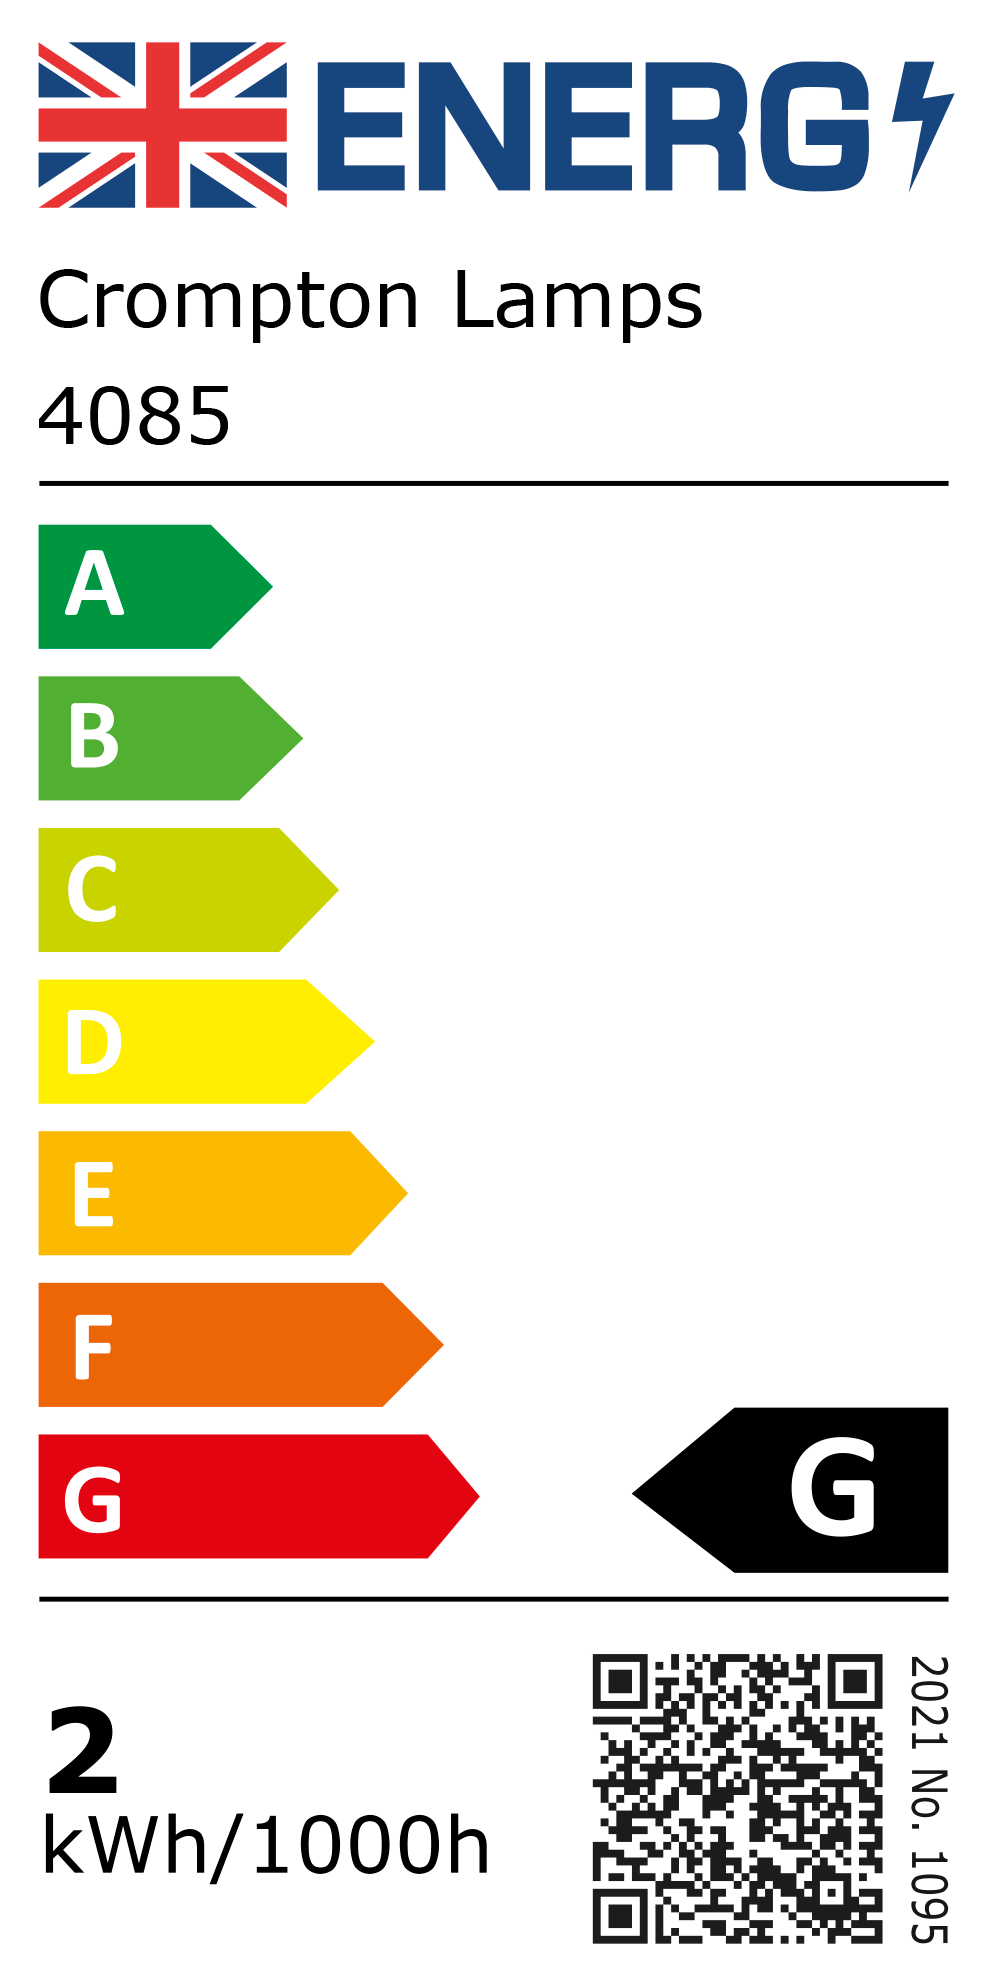 New 2021 Energy Rating Label: Stock Code 4085